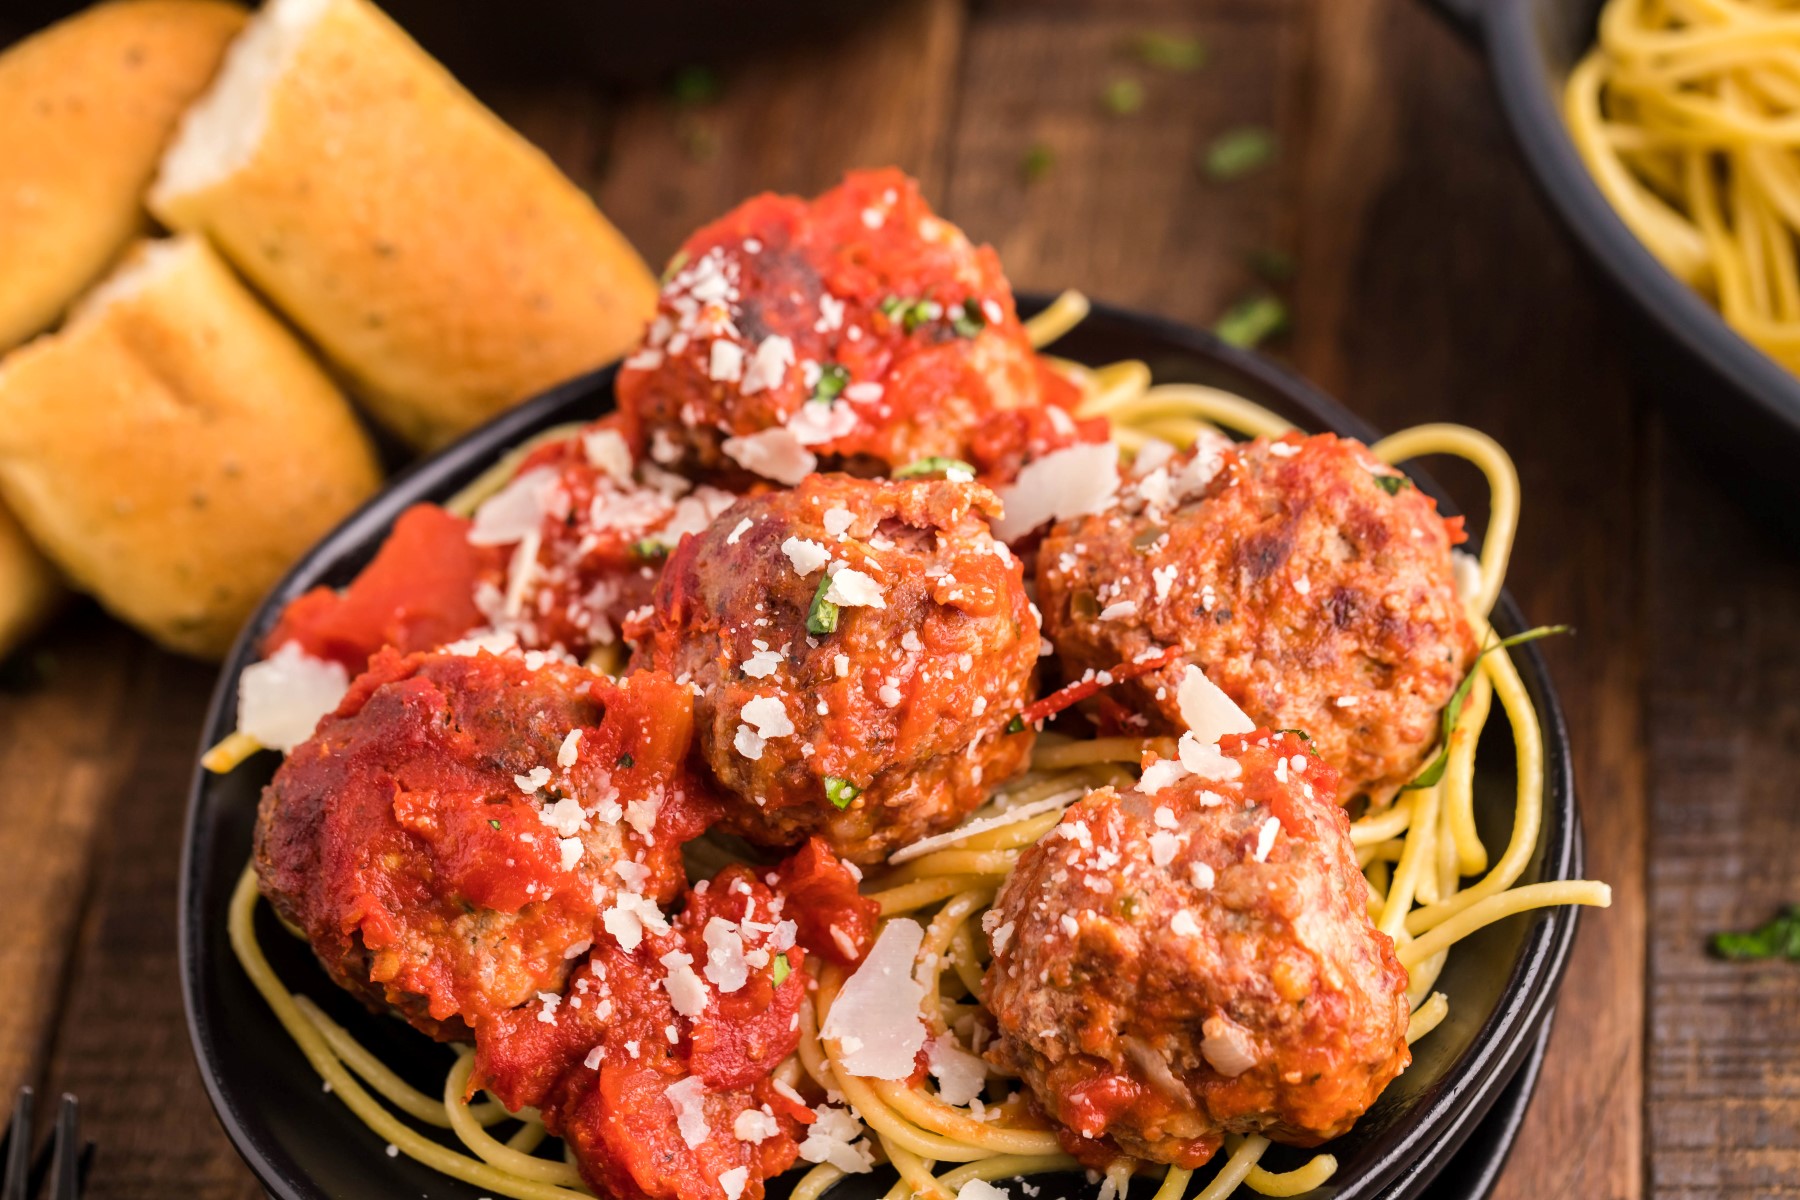 Meatballs served on top of spaghetti with bread on the side and grated parmesan on top